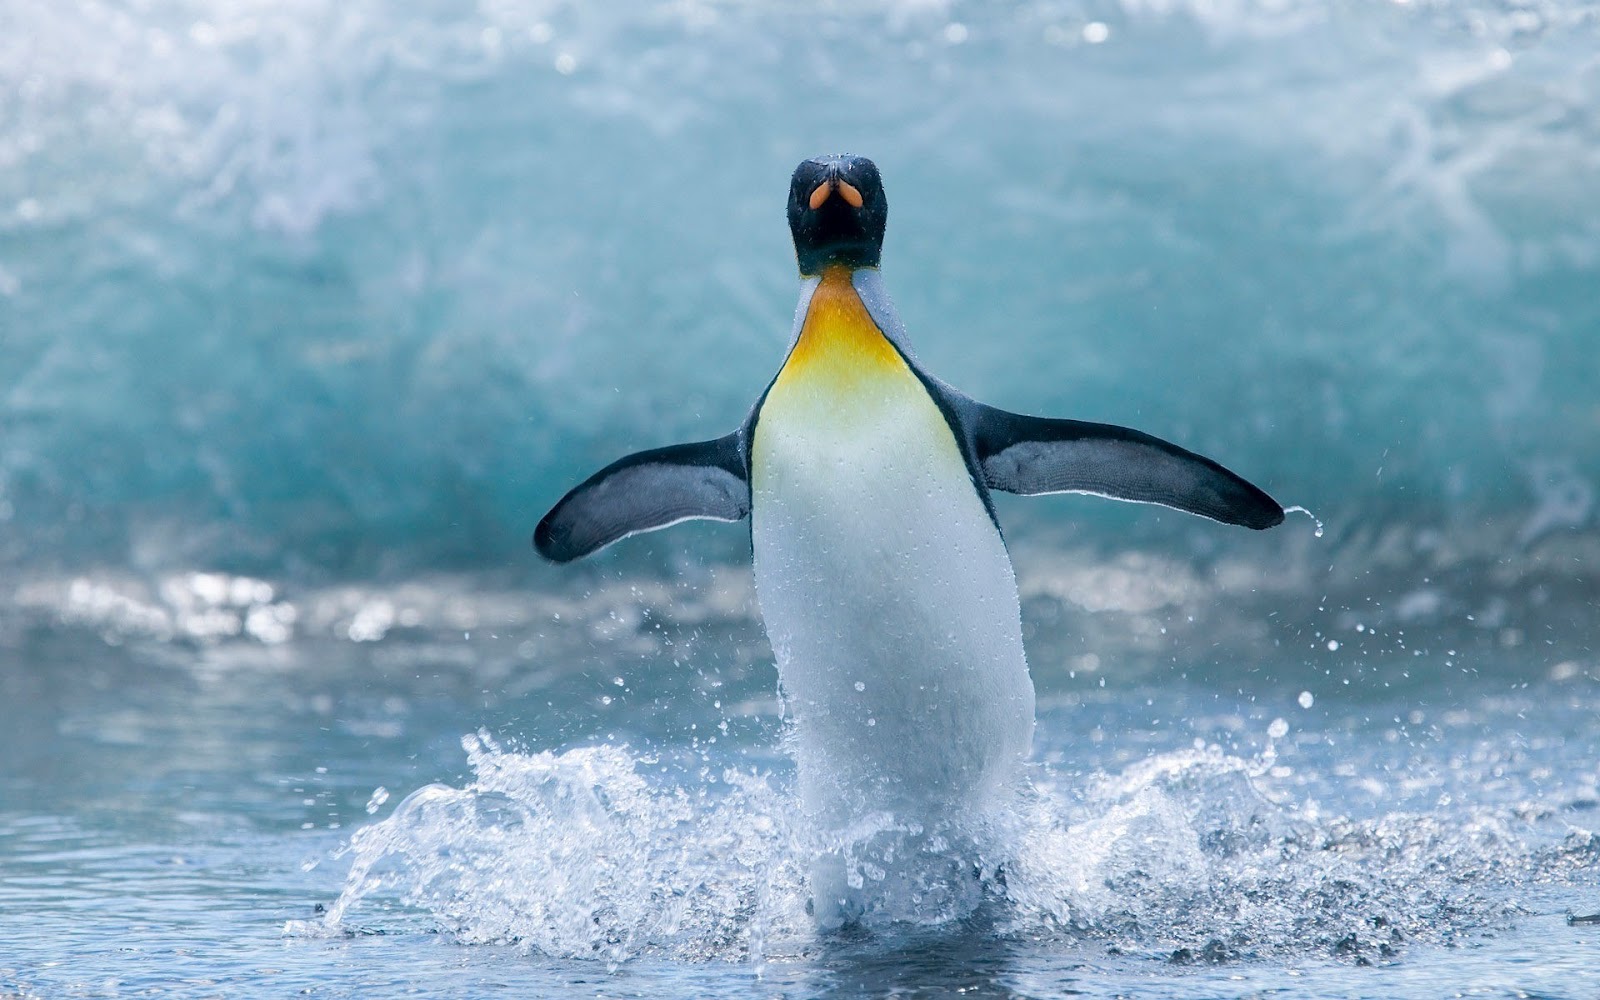  penguin wallpaper with a water skiing penguin hd penguins wallpapers